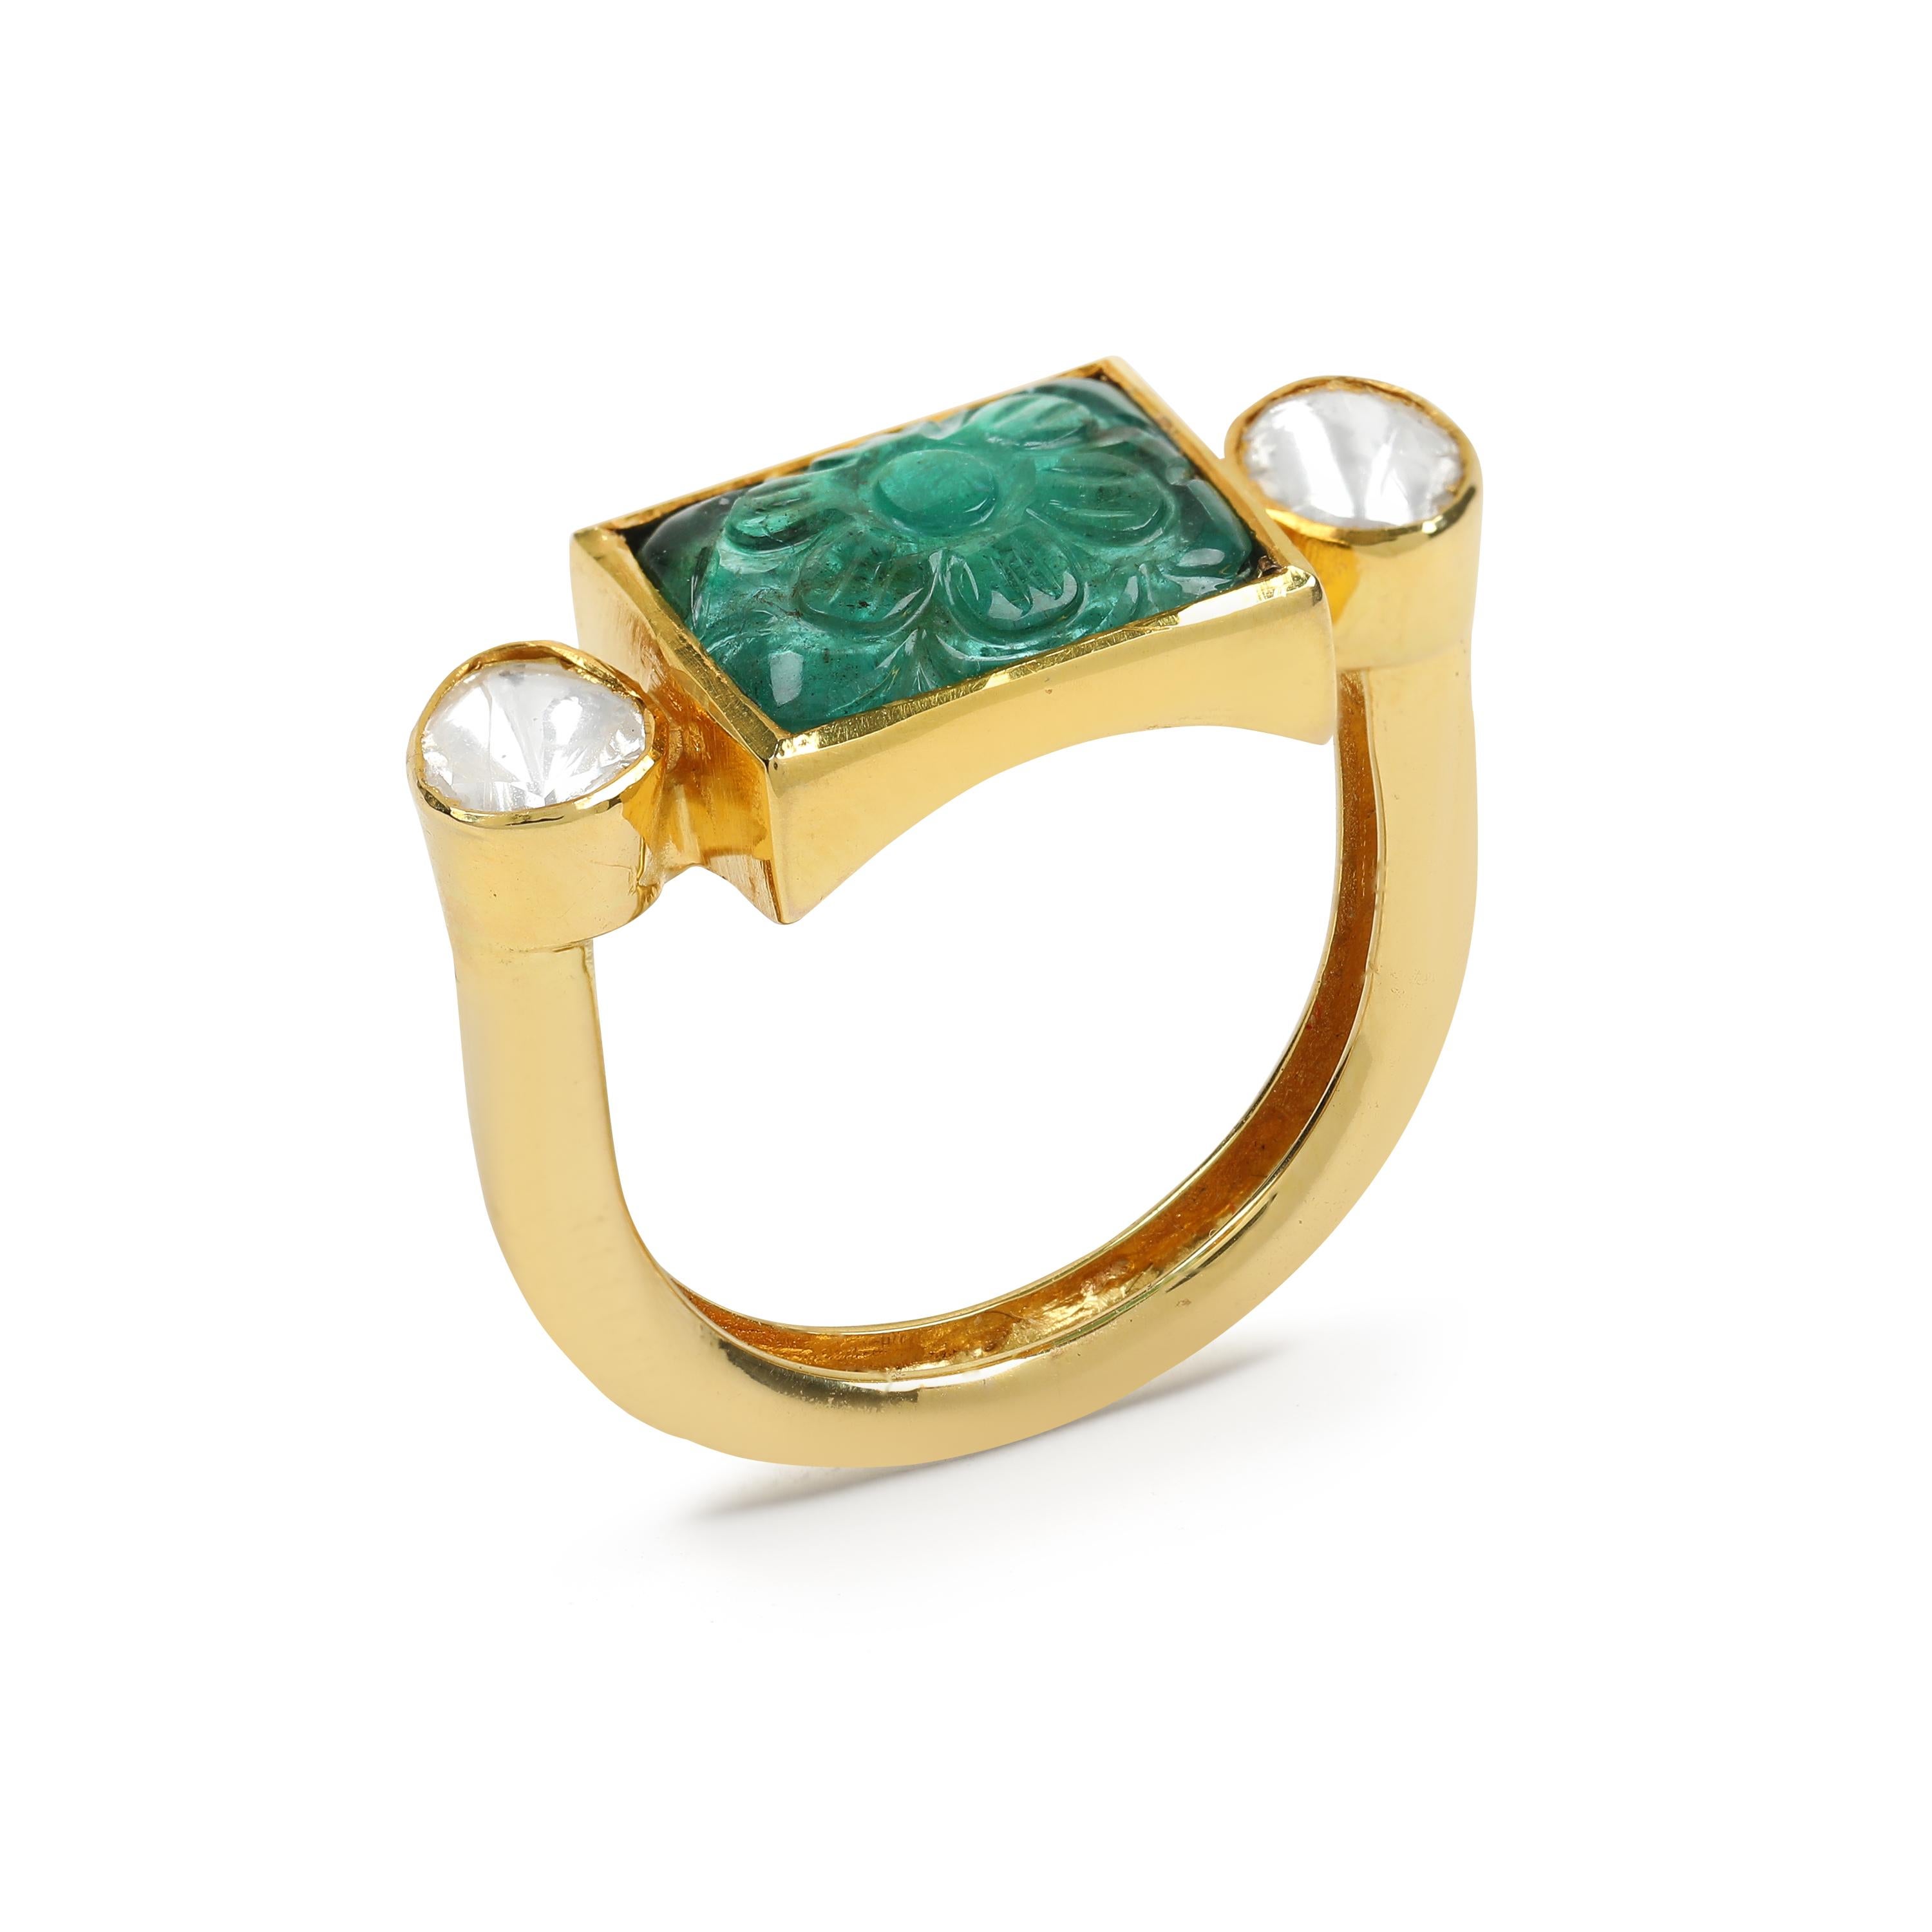 Contemporary 14 Karat Yellow Gold Square Stud Earrings with Uncut Diamonds and Emerald For Sale